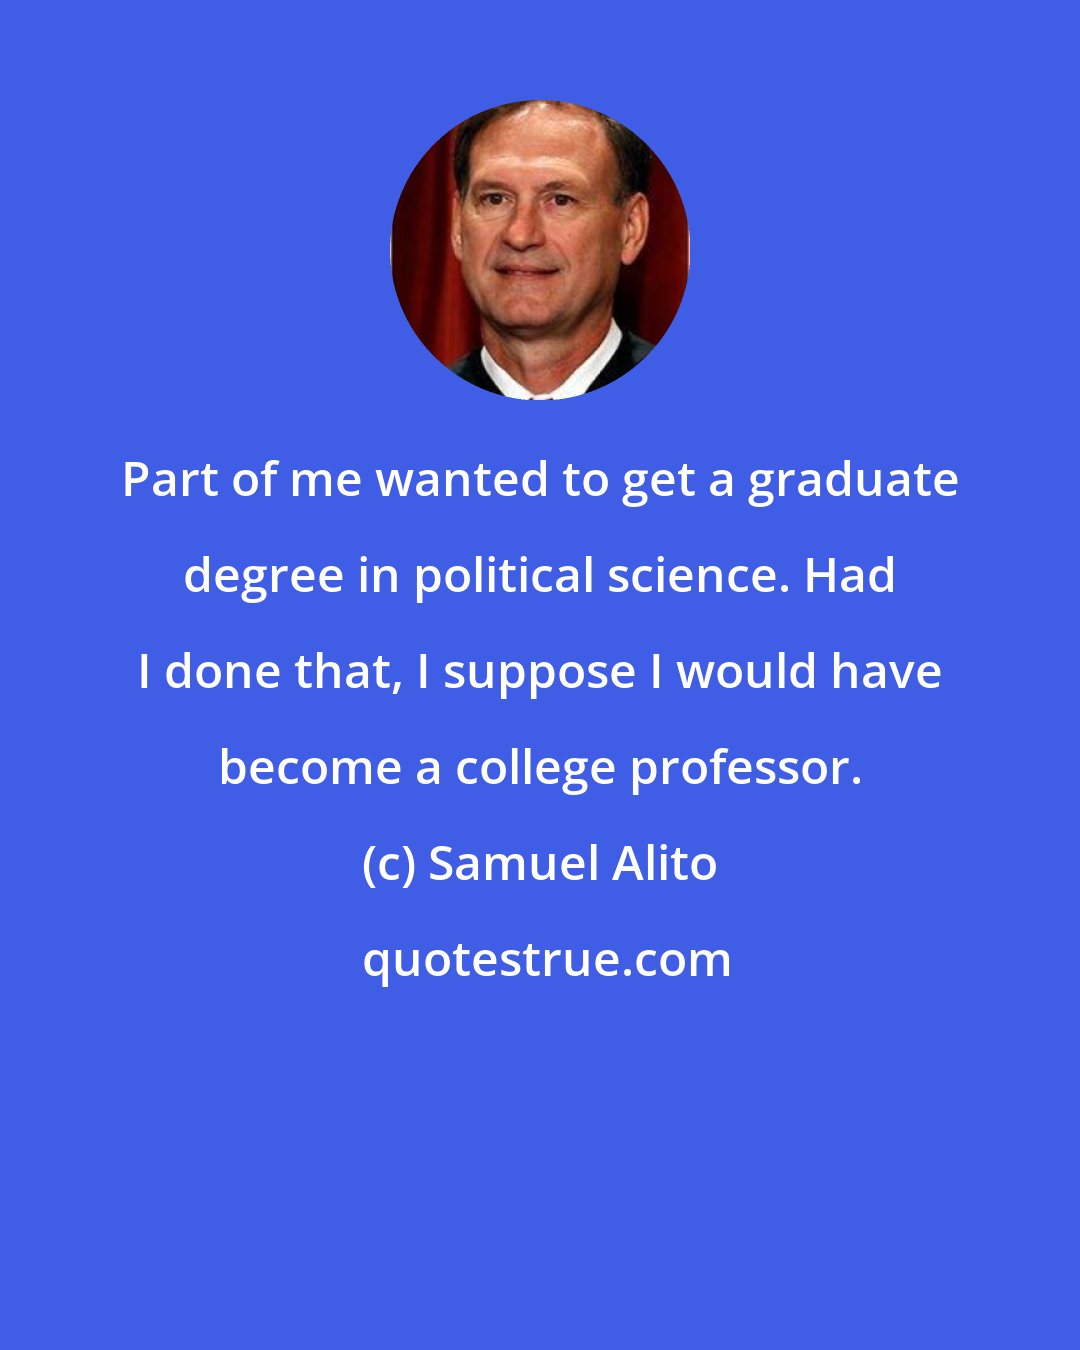 Samuel Alito: Part of me wanted to get a graduate degree in political science. Had I done that, I suppose I would have become a college professor.